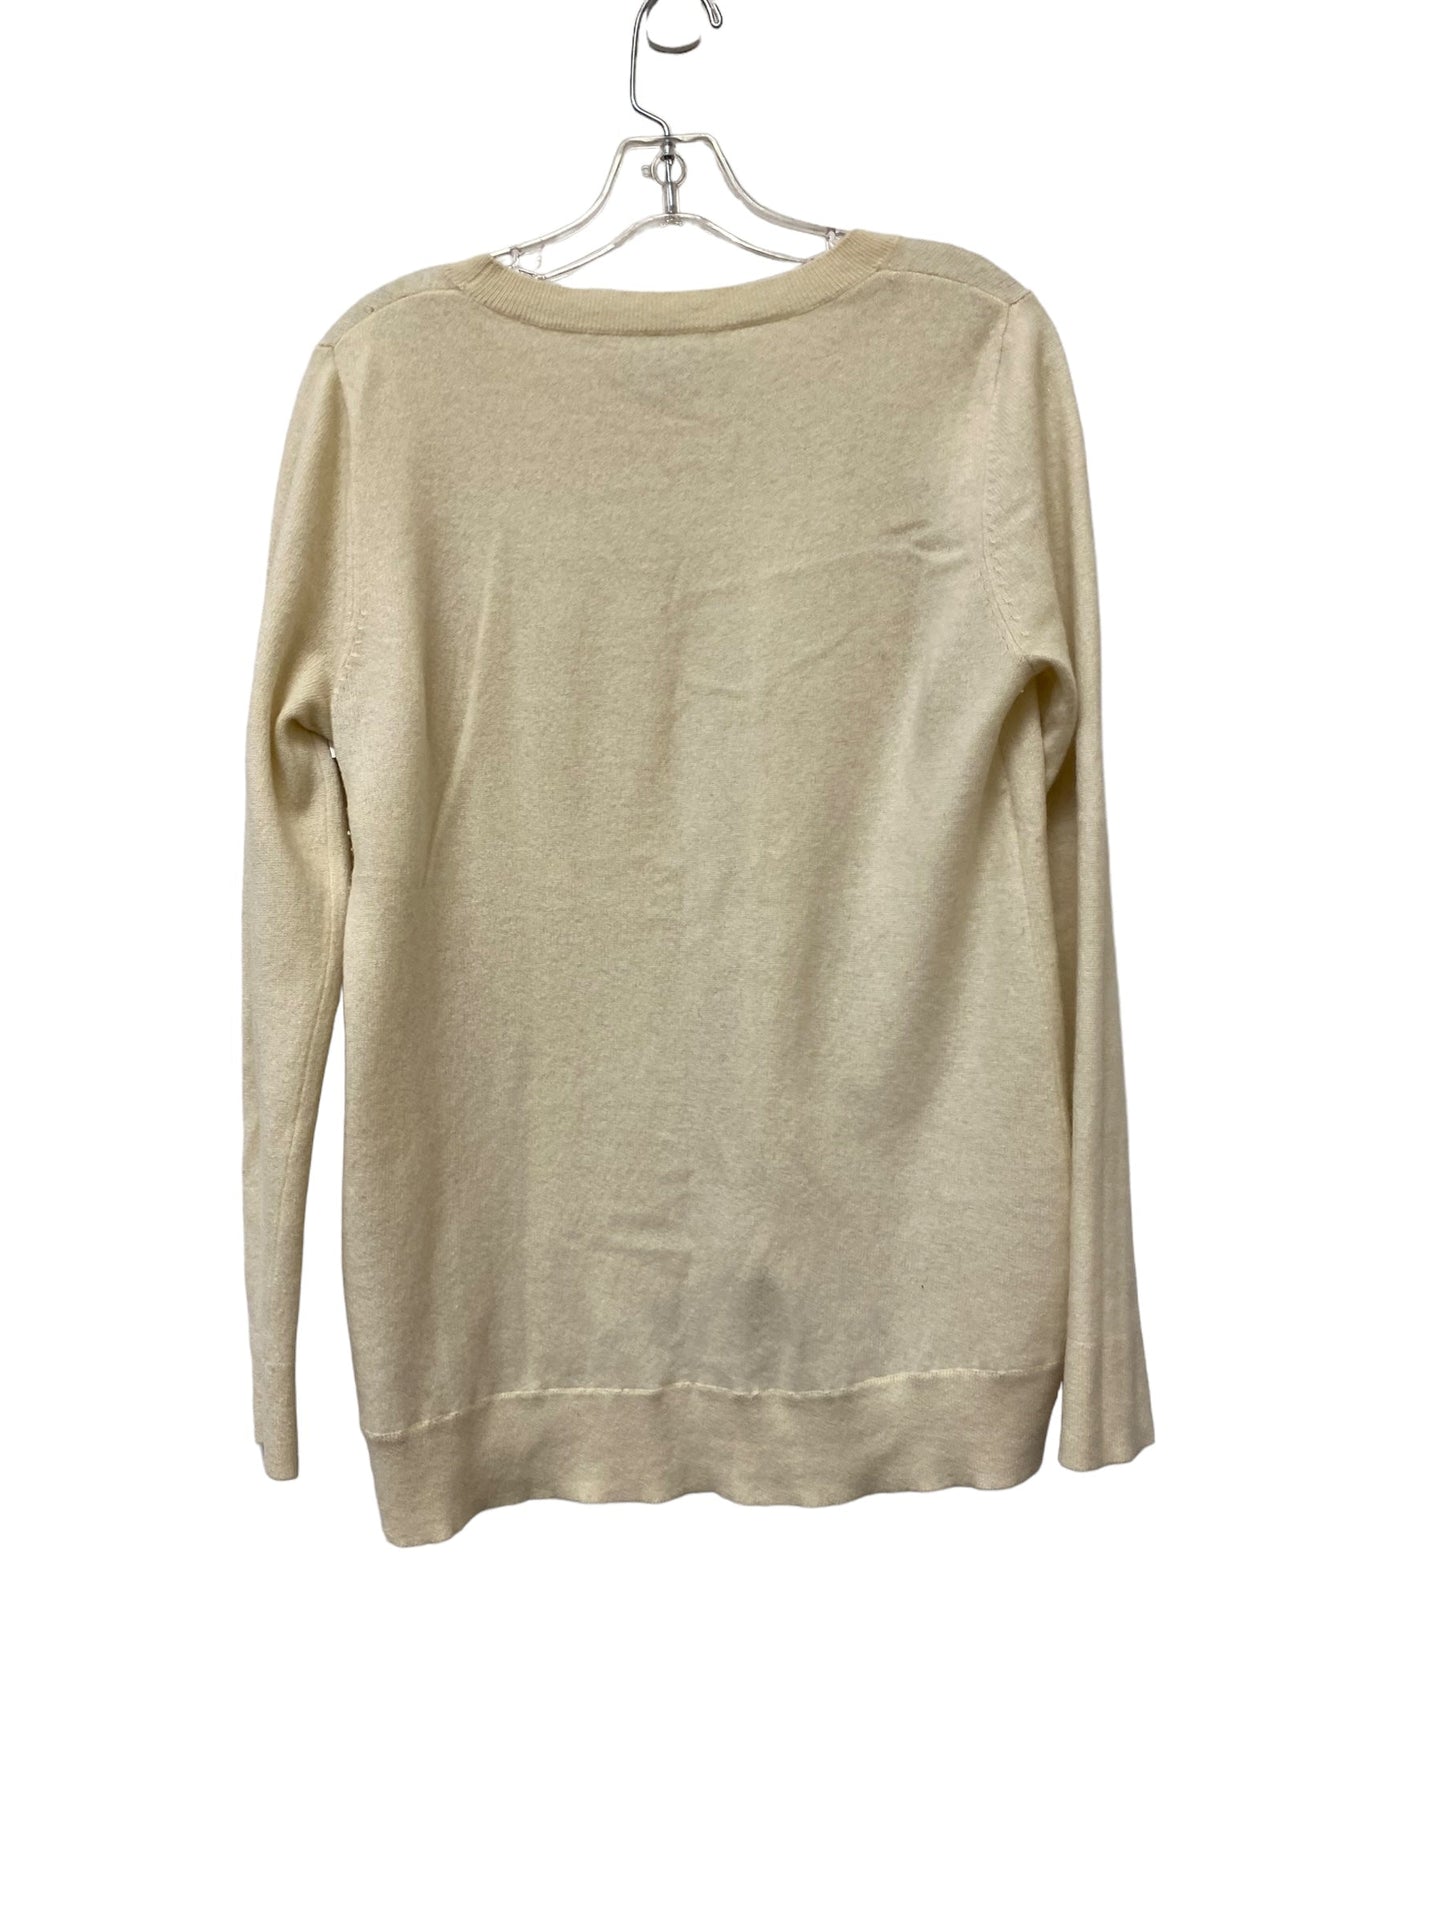 Sweater Cashmere By Neiman Marcus  Size: M